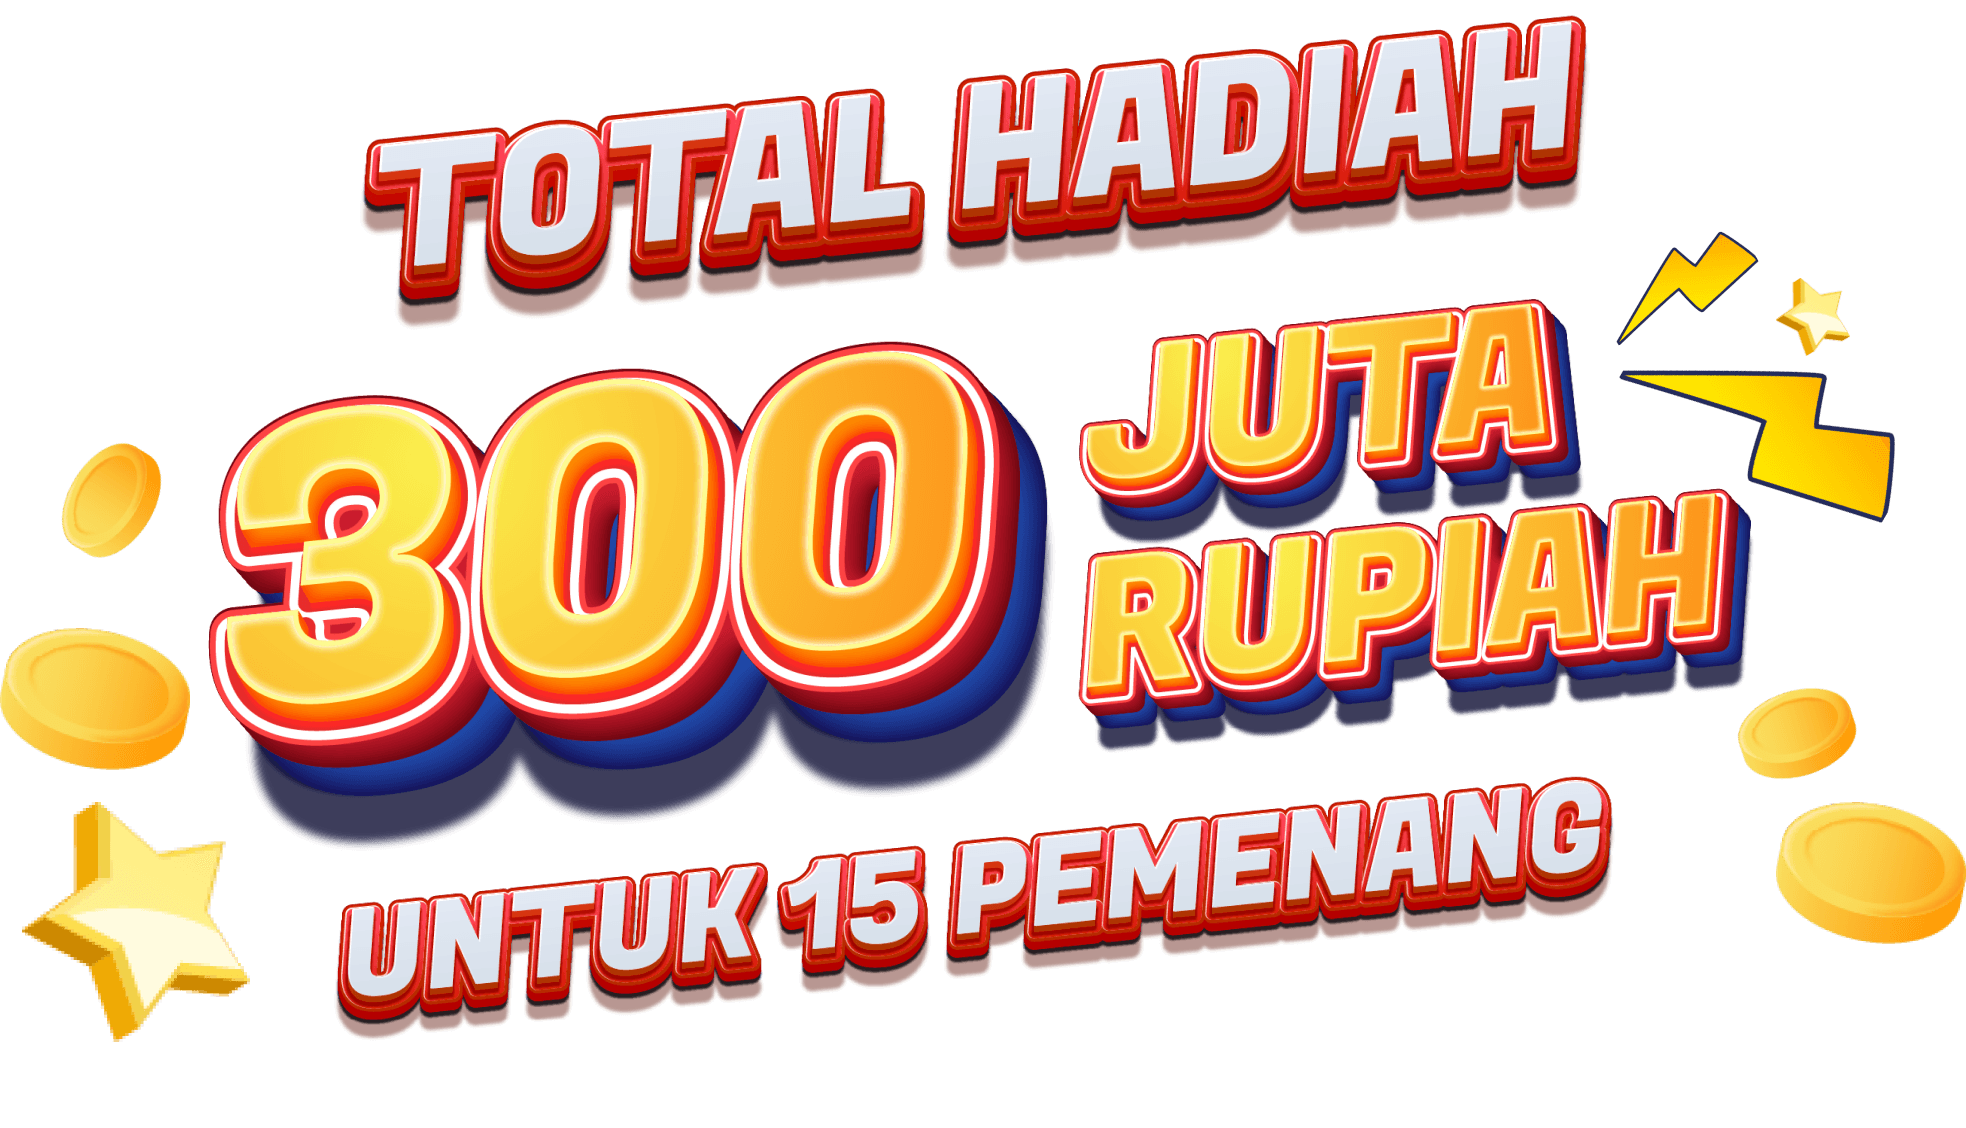 Bank Indonesia Digital Content Competition 2023